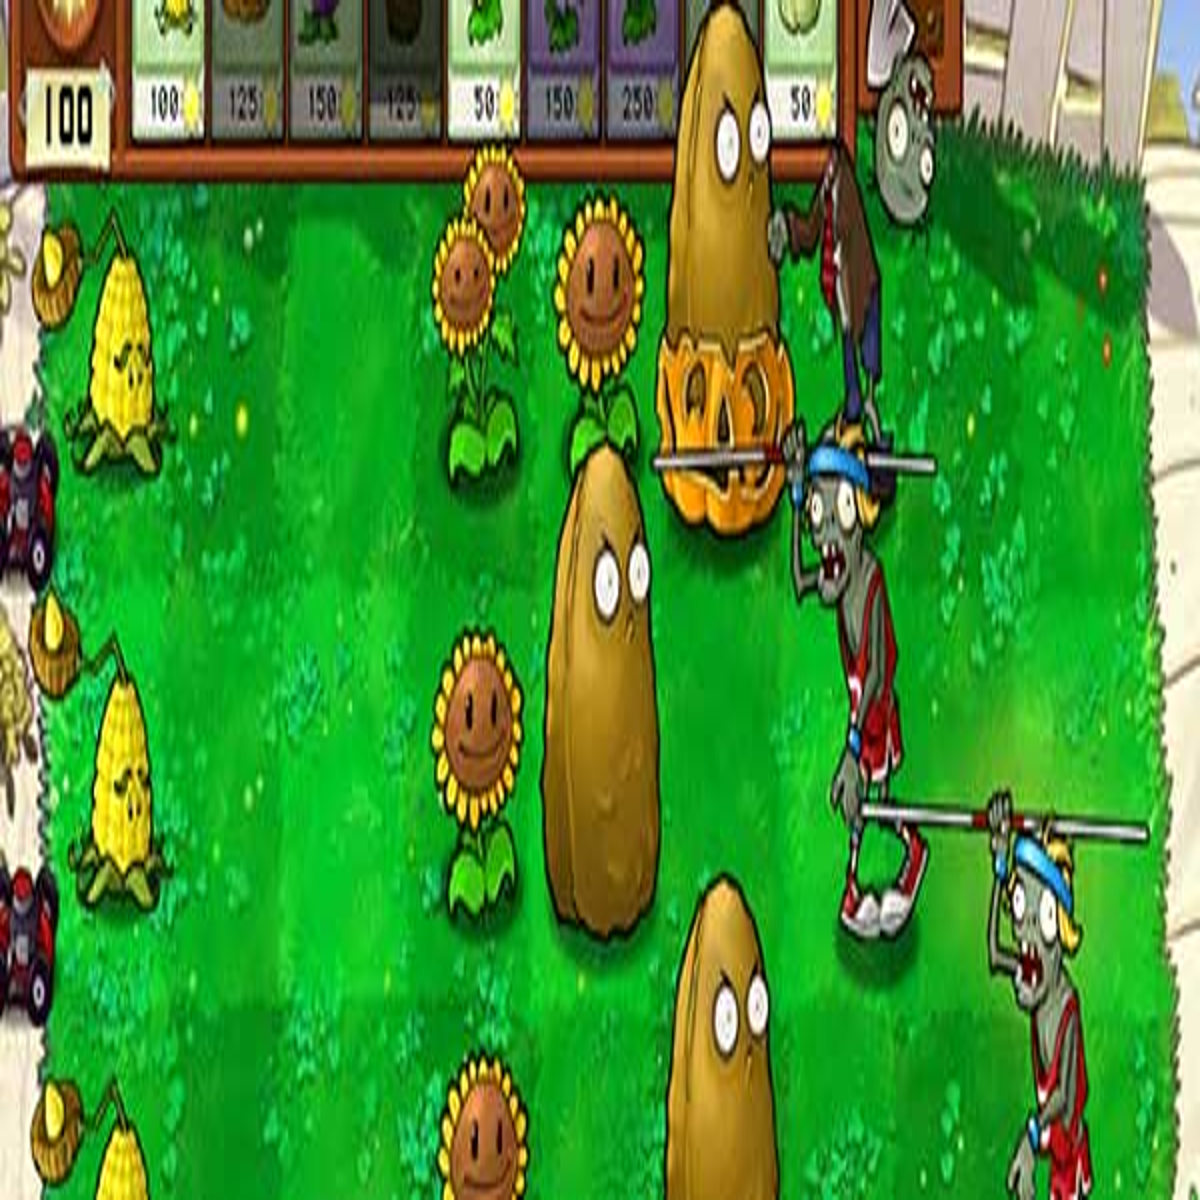 MulchMadness is back with Round 2! - Plants vs. Zombies